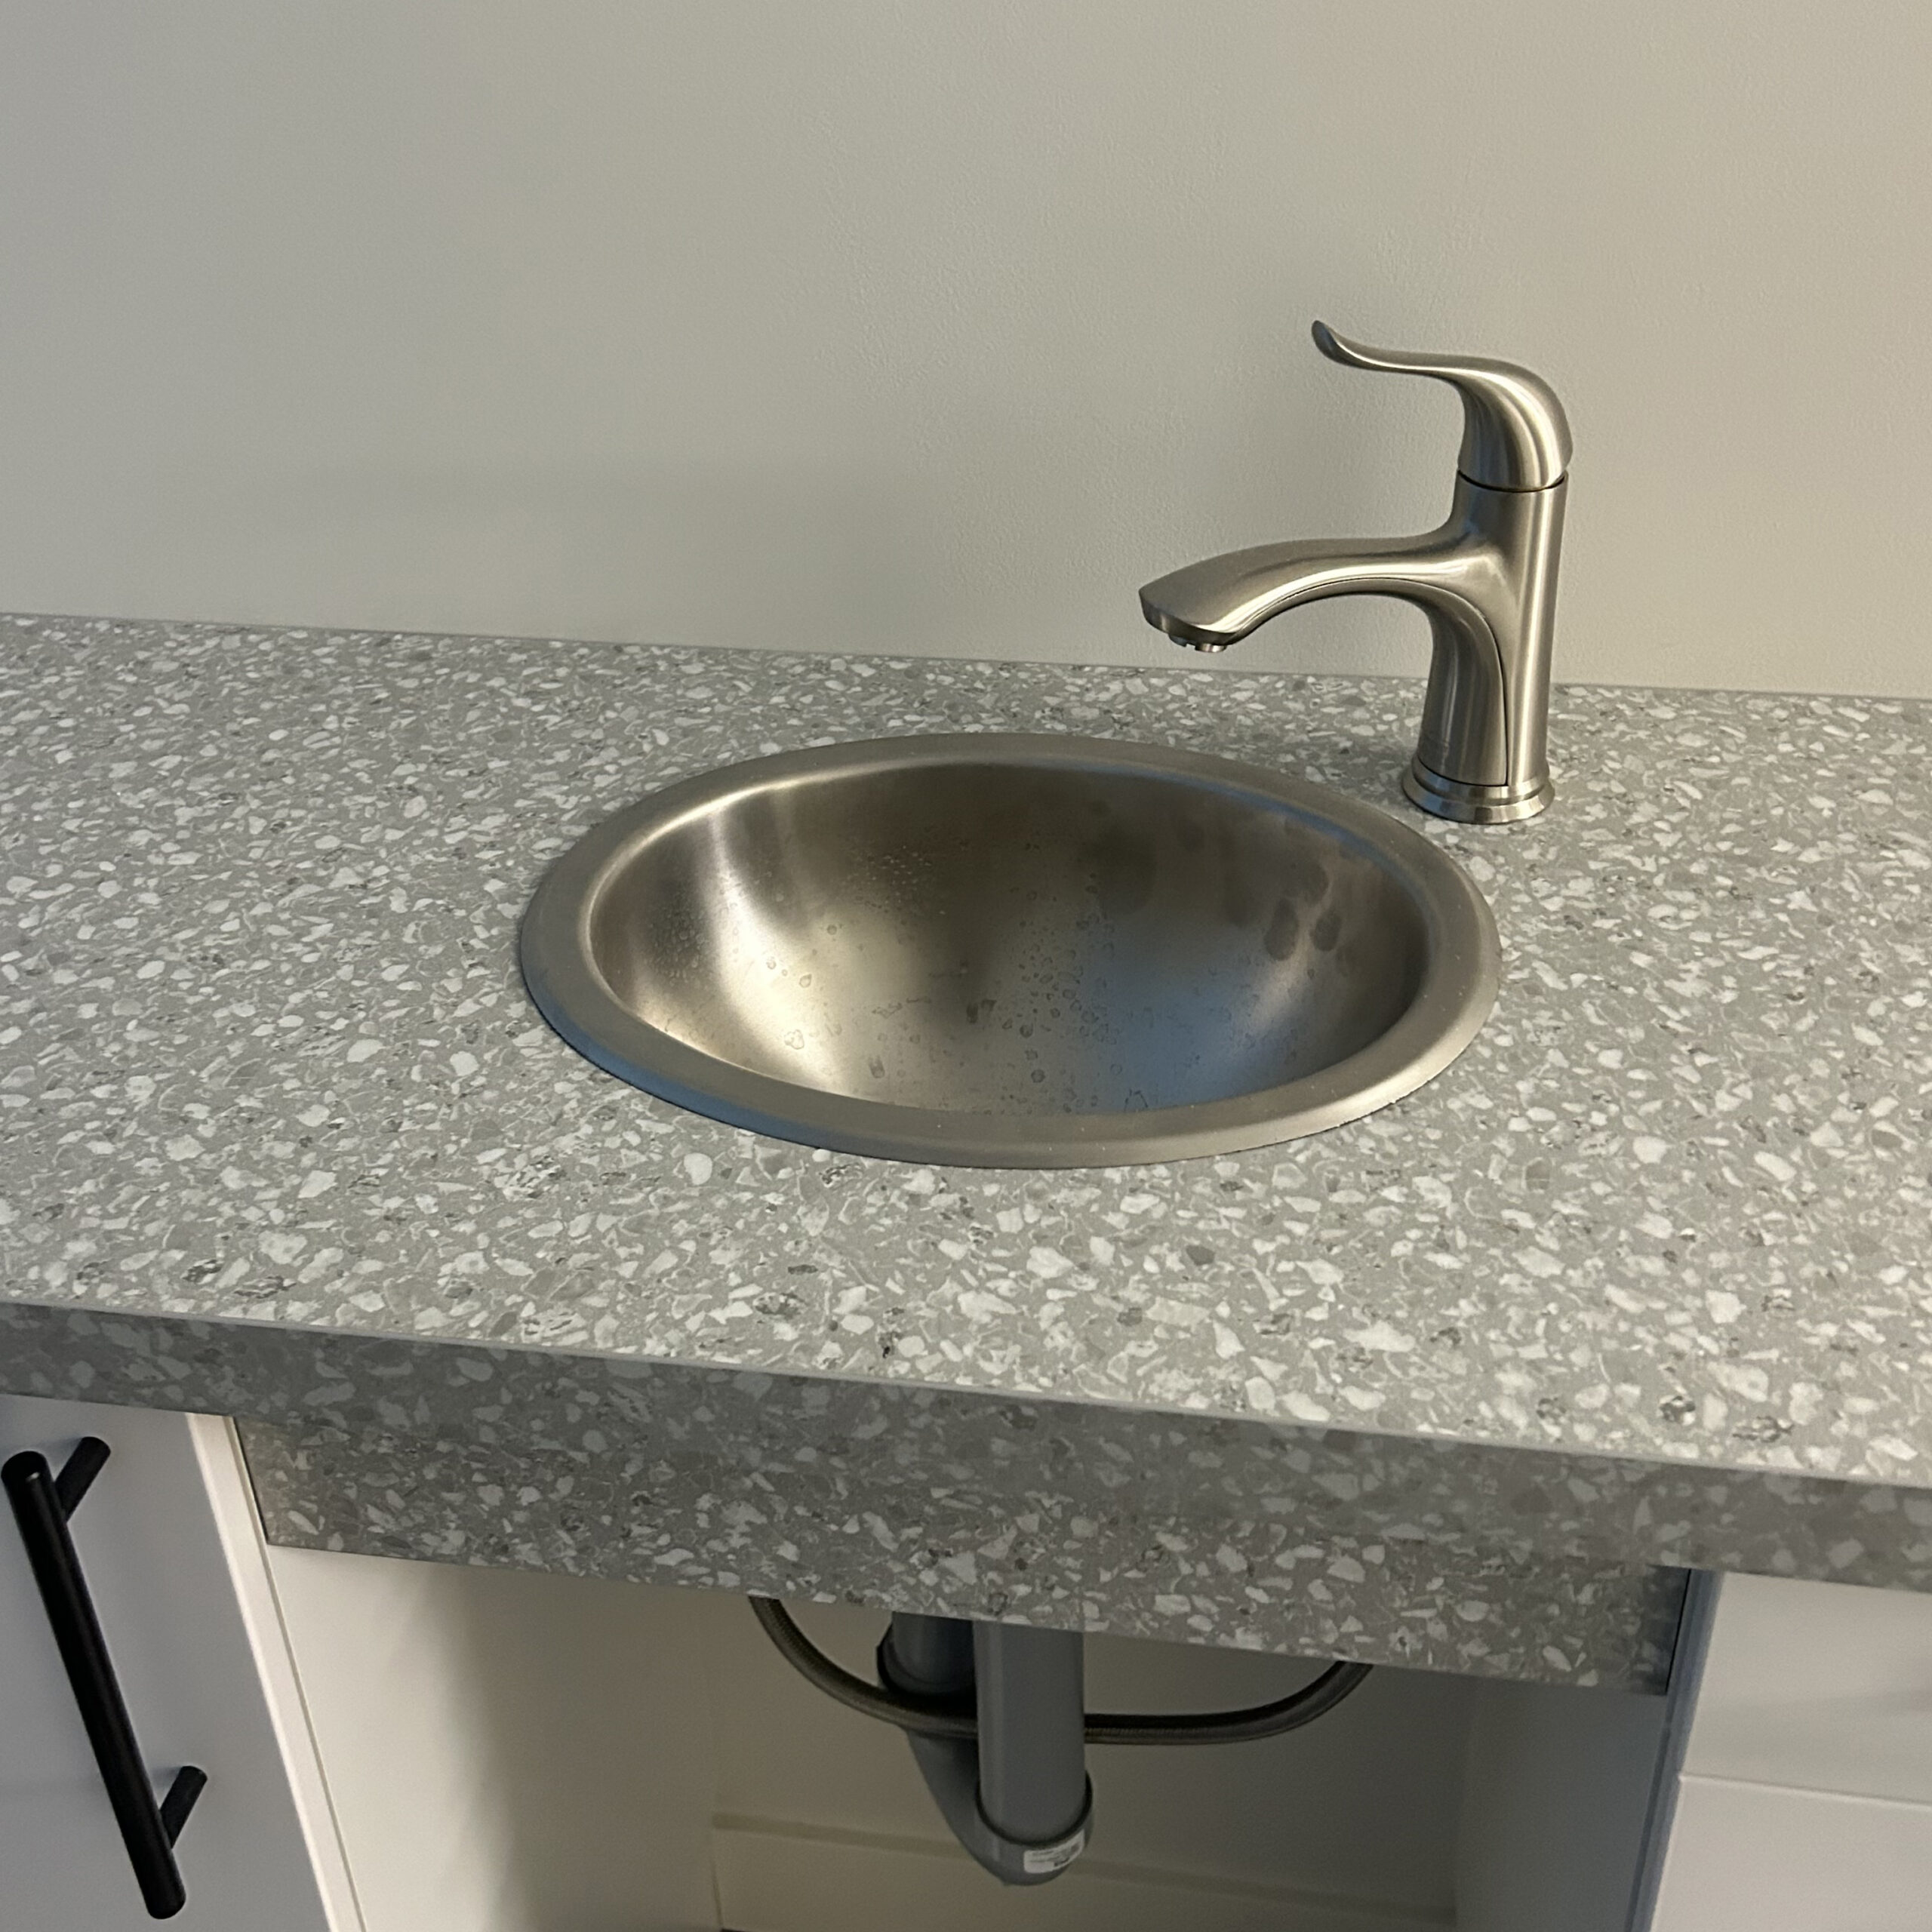 A sink with pipes visible under the counter